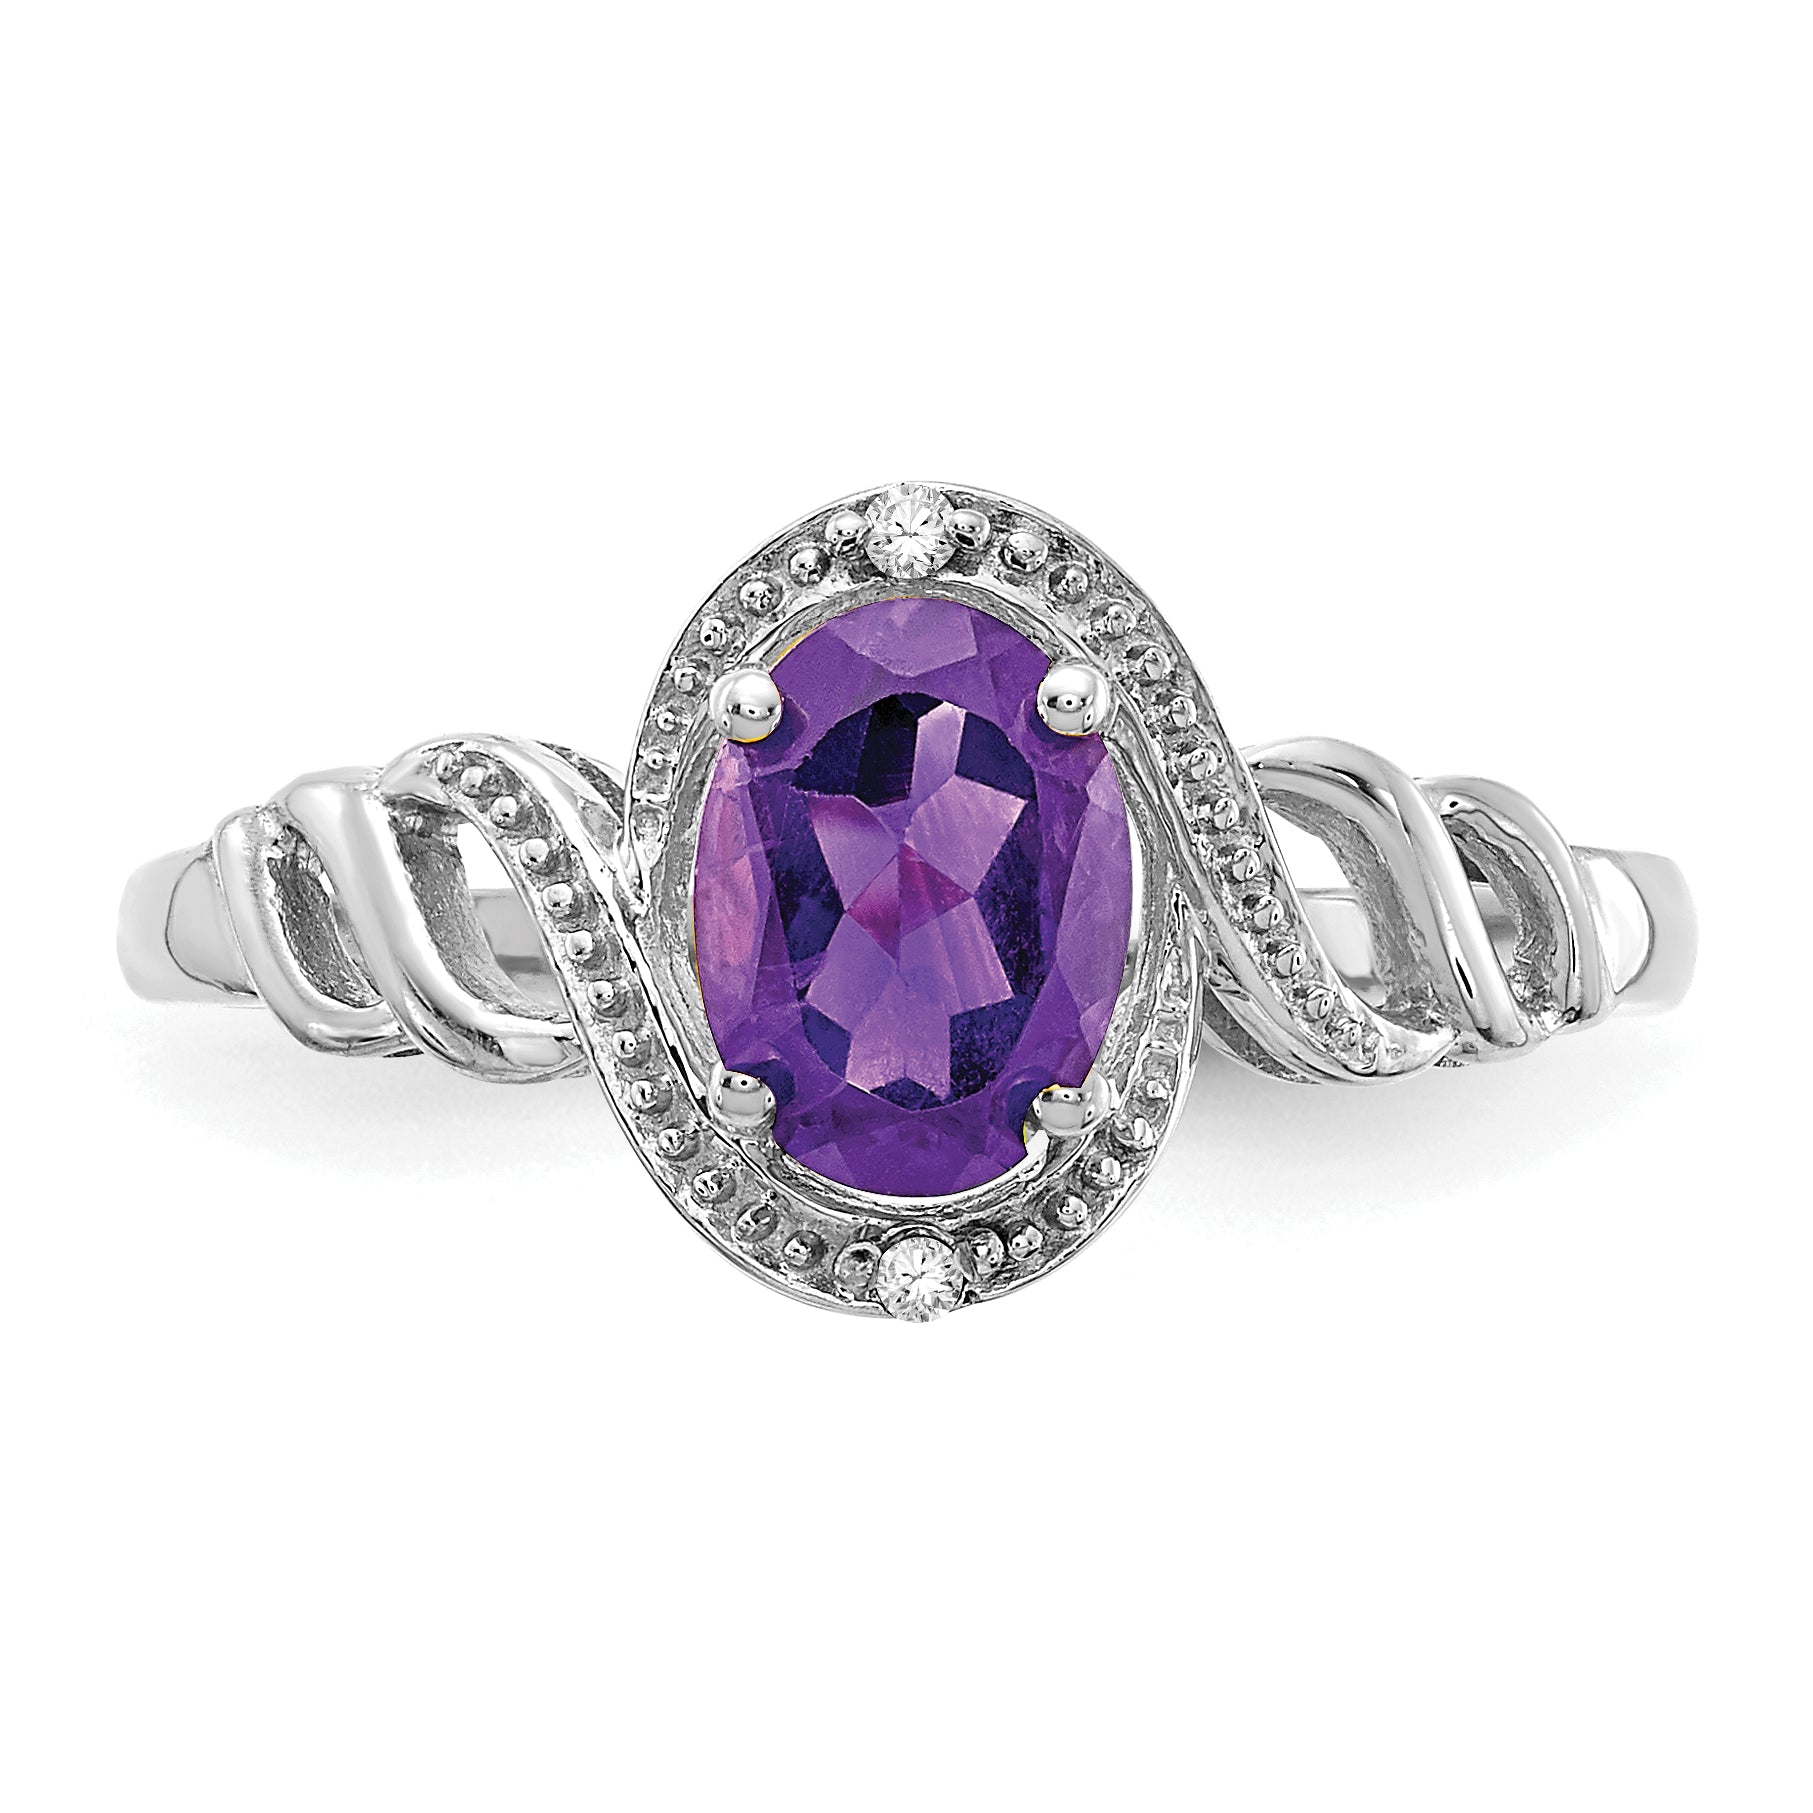 10k White Gold Amethyst and Diamond Ring